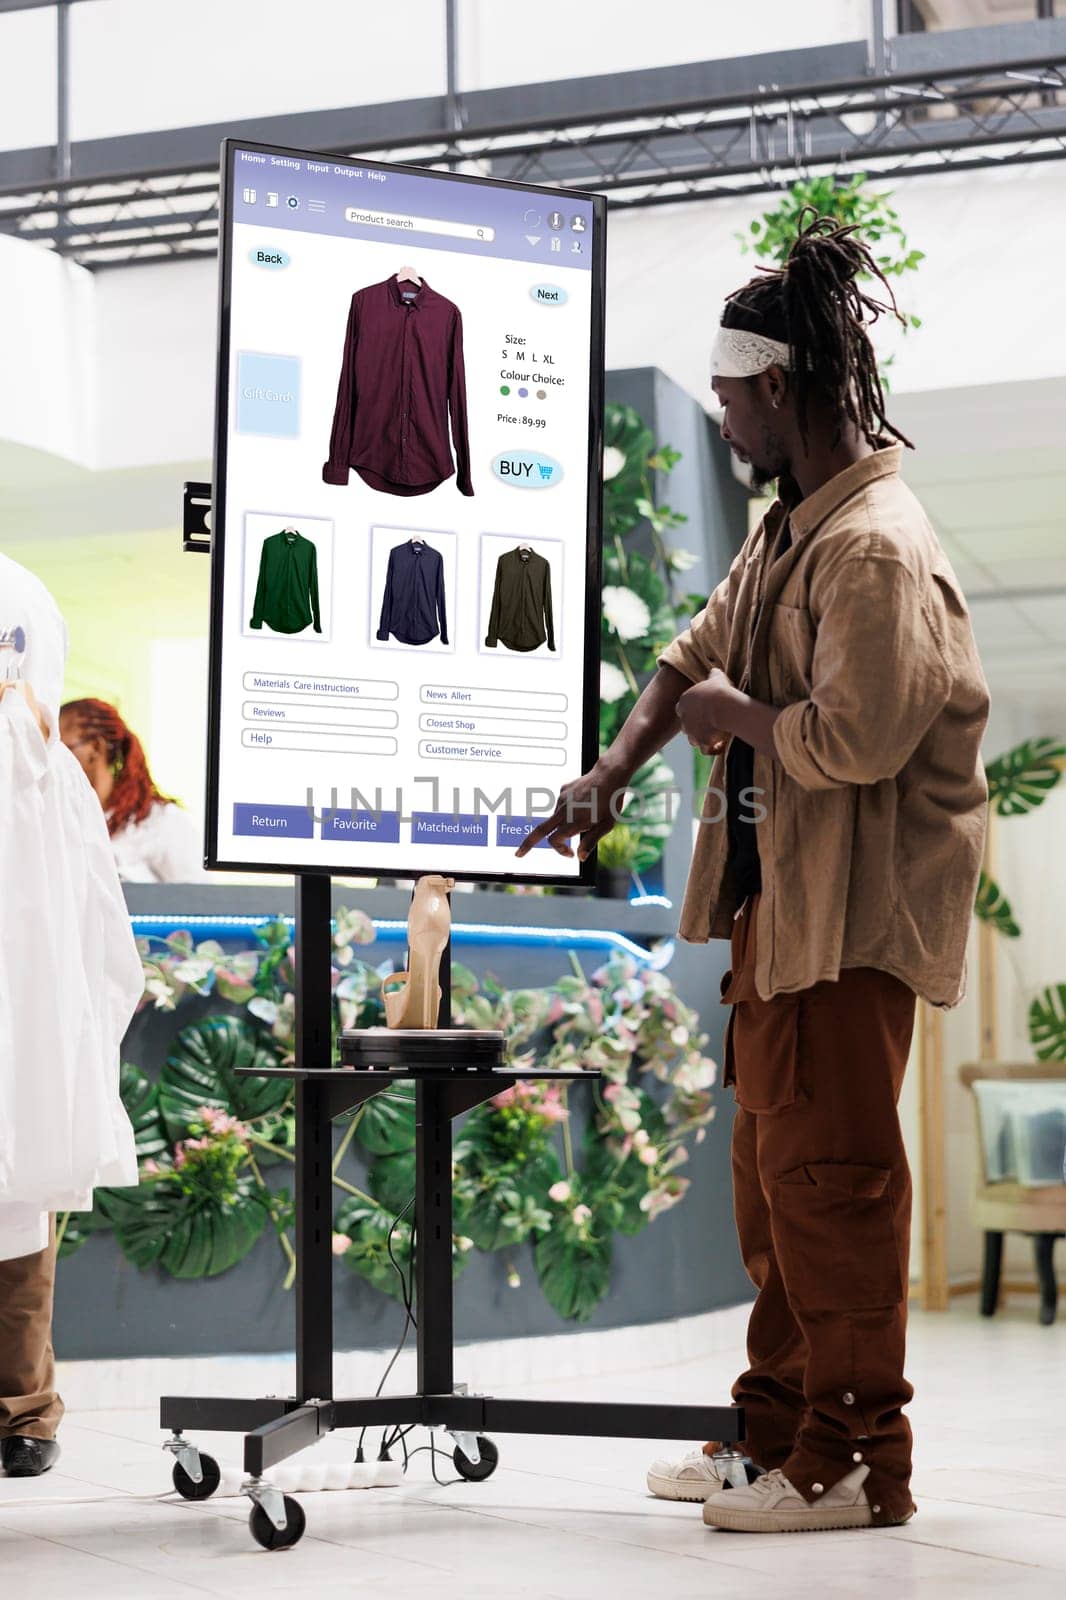 Shopper looks for clothes on monitor kiosk service in fashion boutique at mall. Male customer shopping for clothing line items in retail store, touch screen board for self service concept.